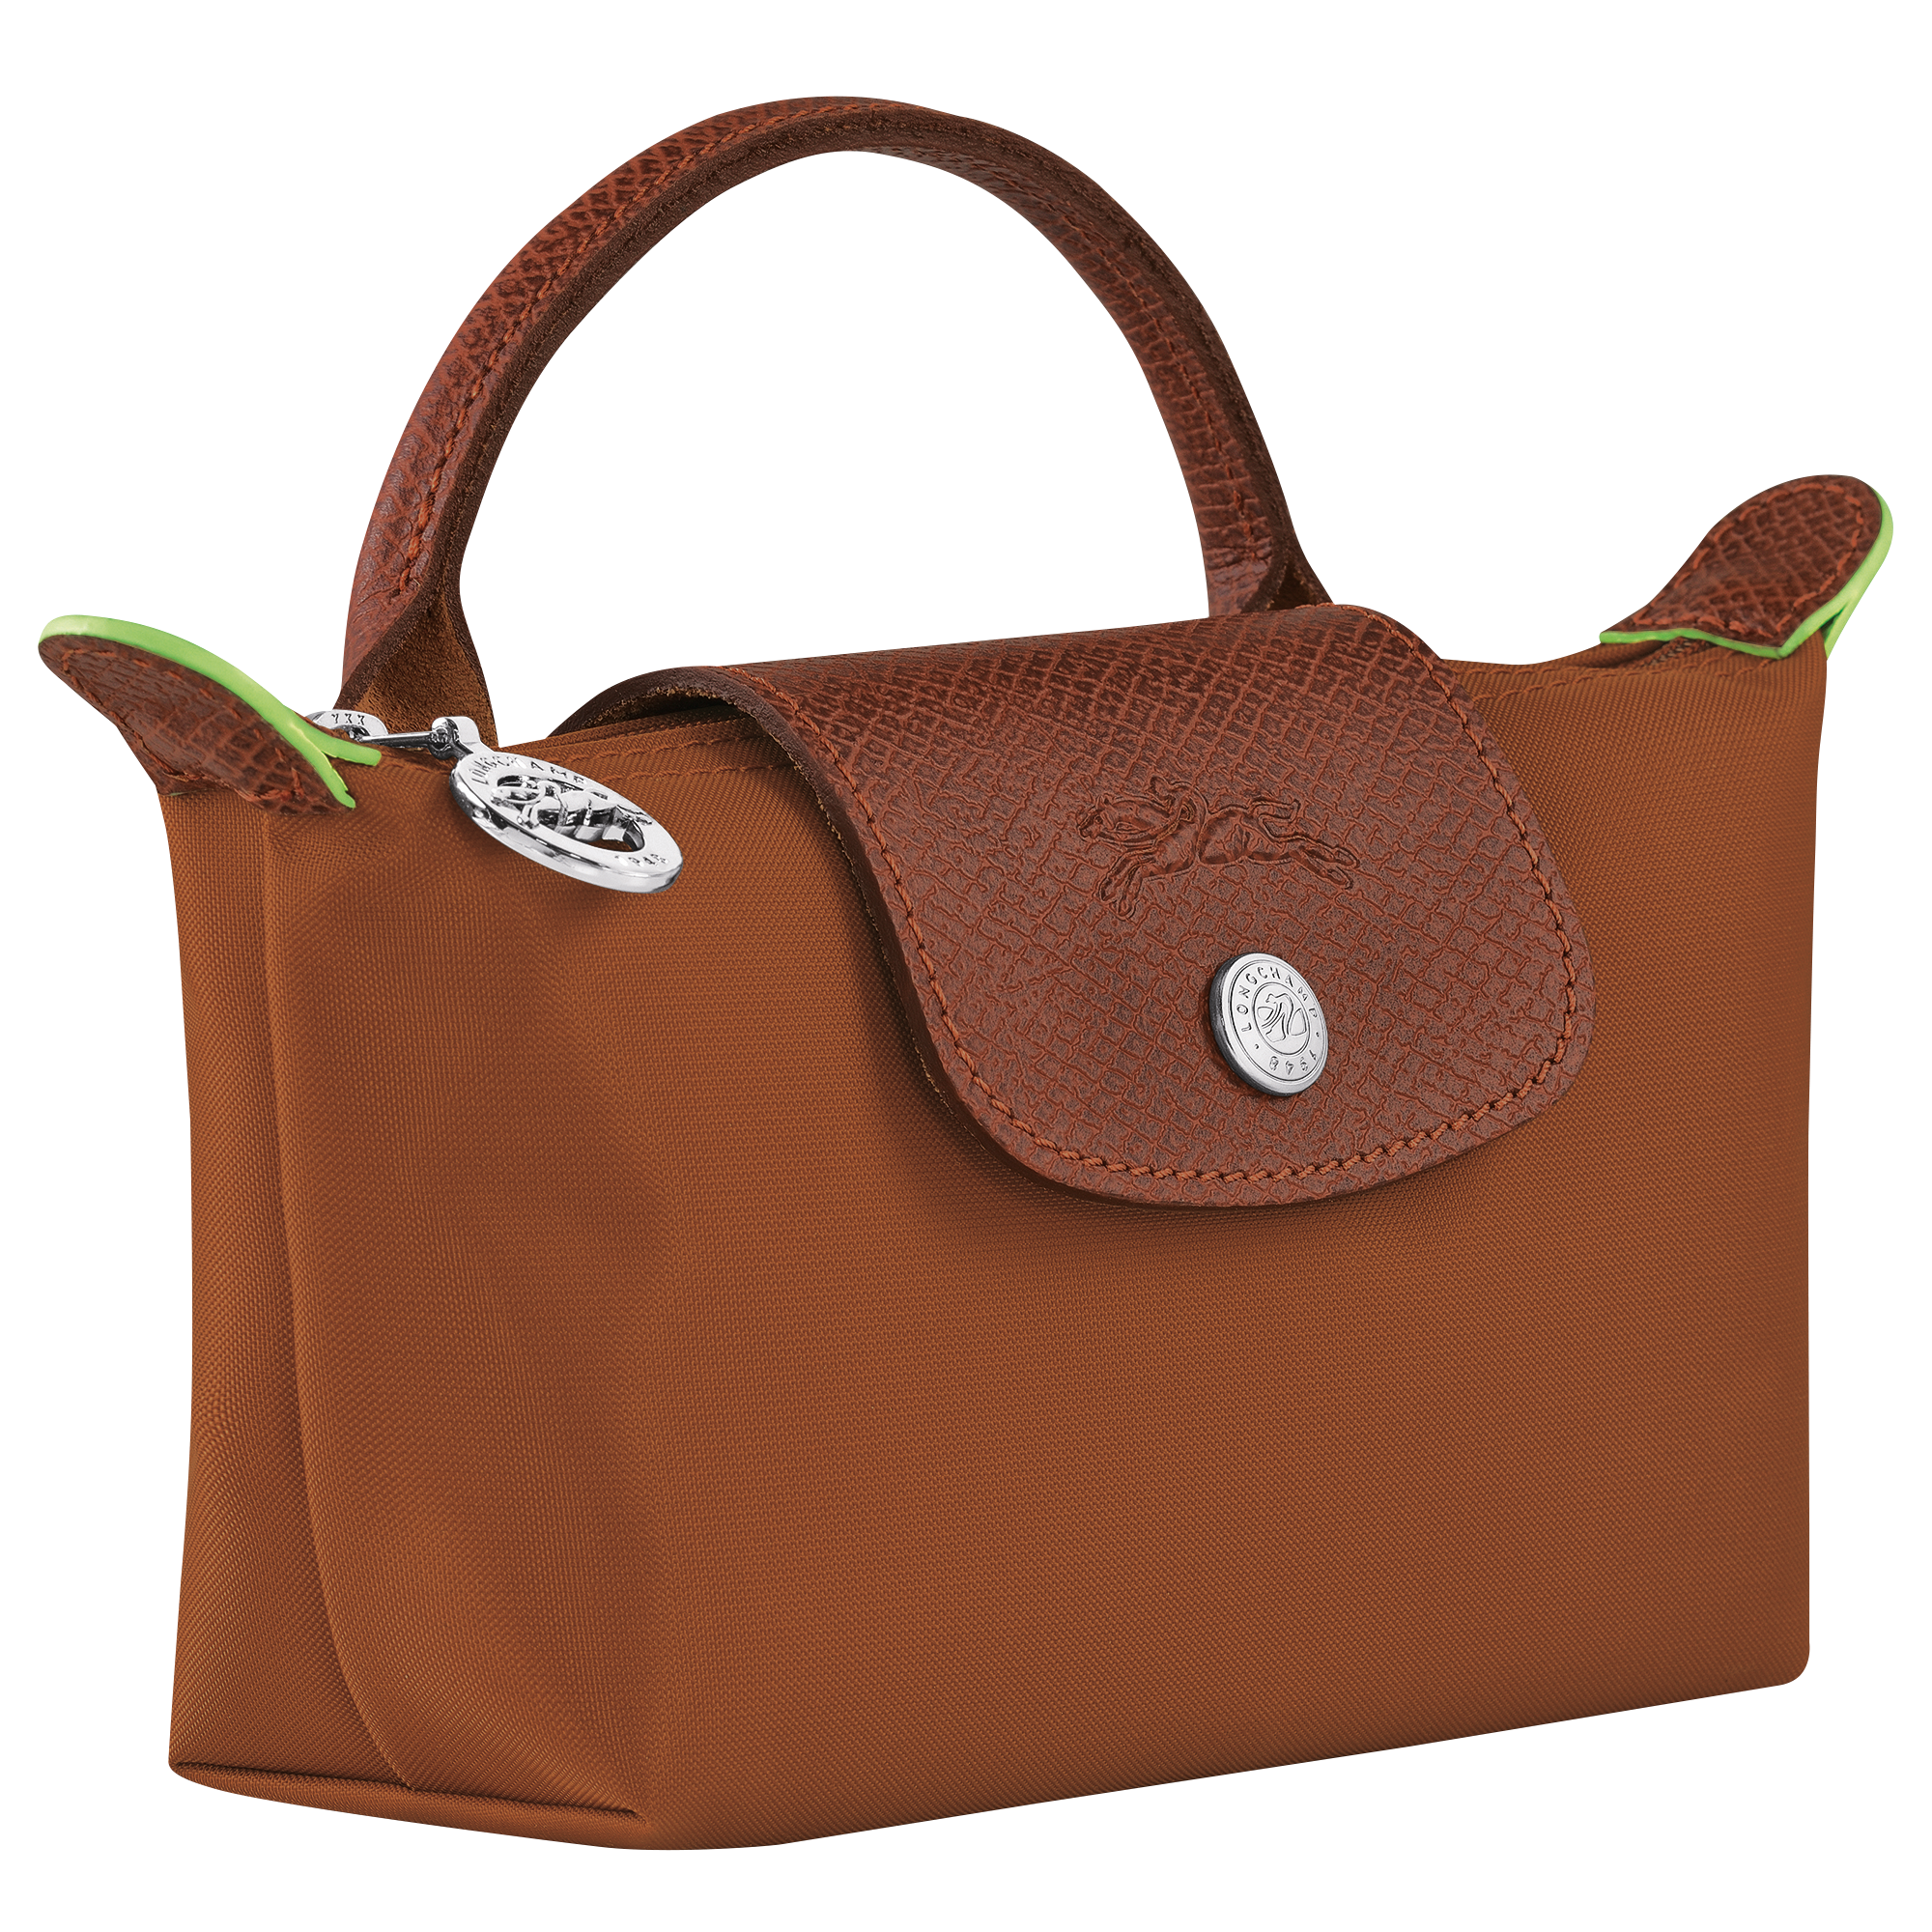 Le Pliage Green Pouch with handle Cognac - Recycled canvas (34175919504)